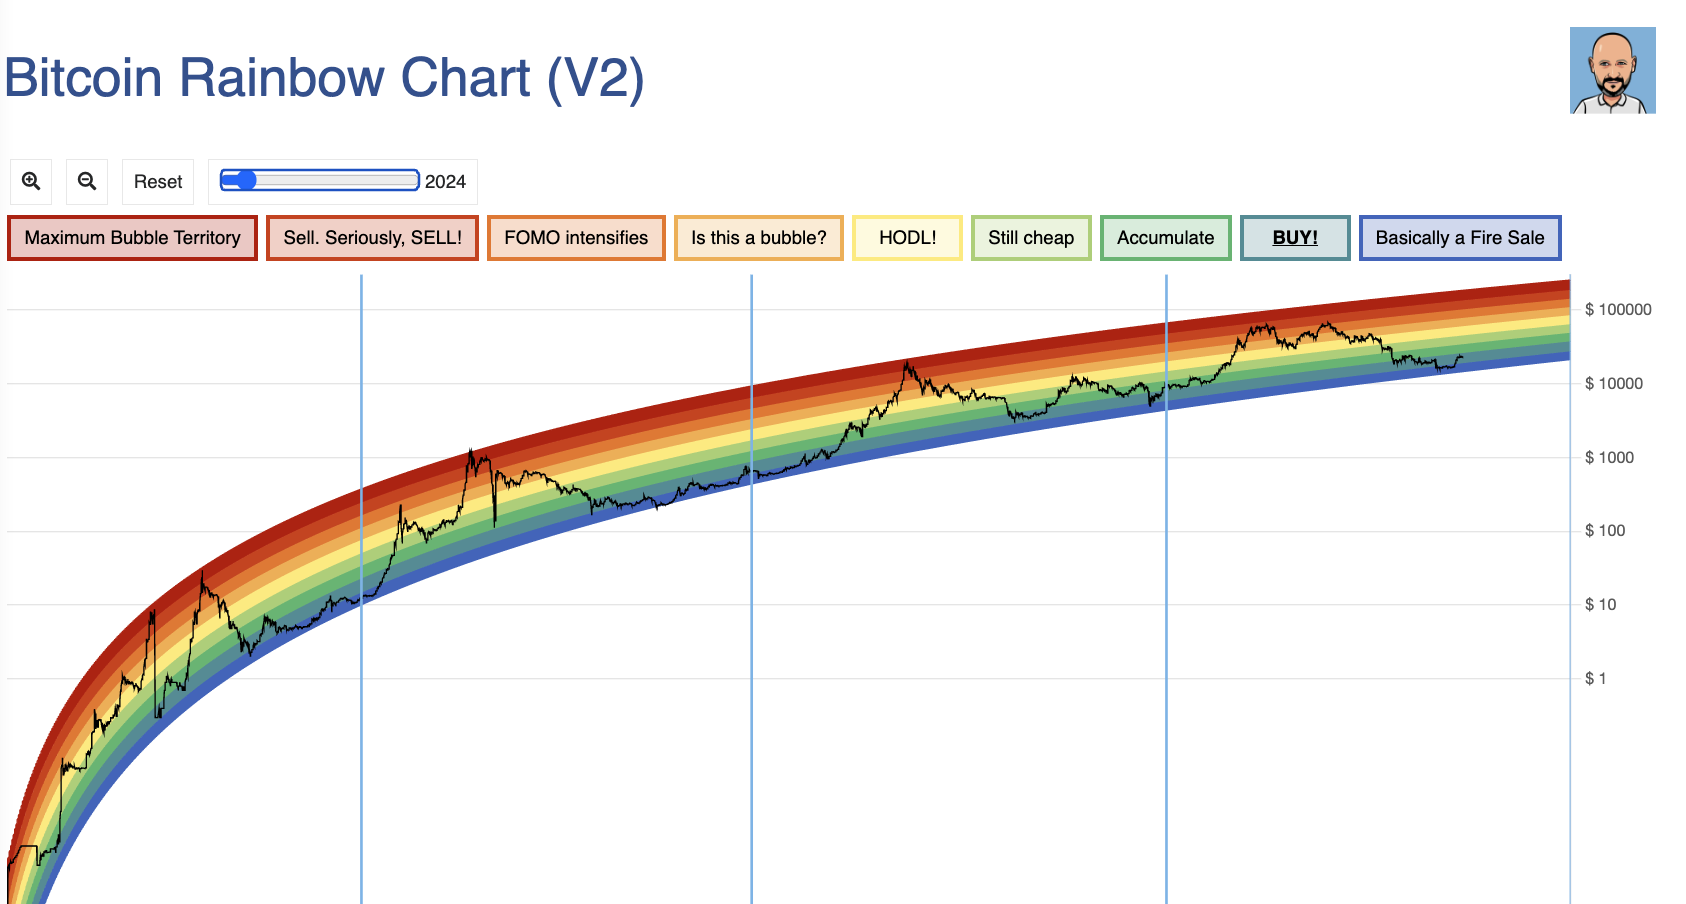 This rainbow chart helps make timing investments in cryptocurrency much easier